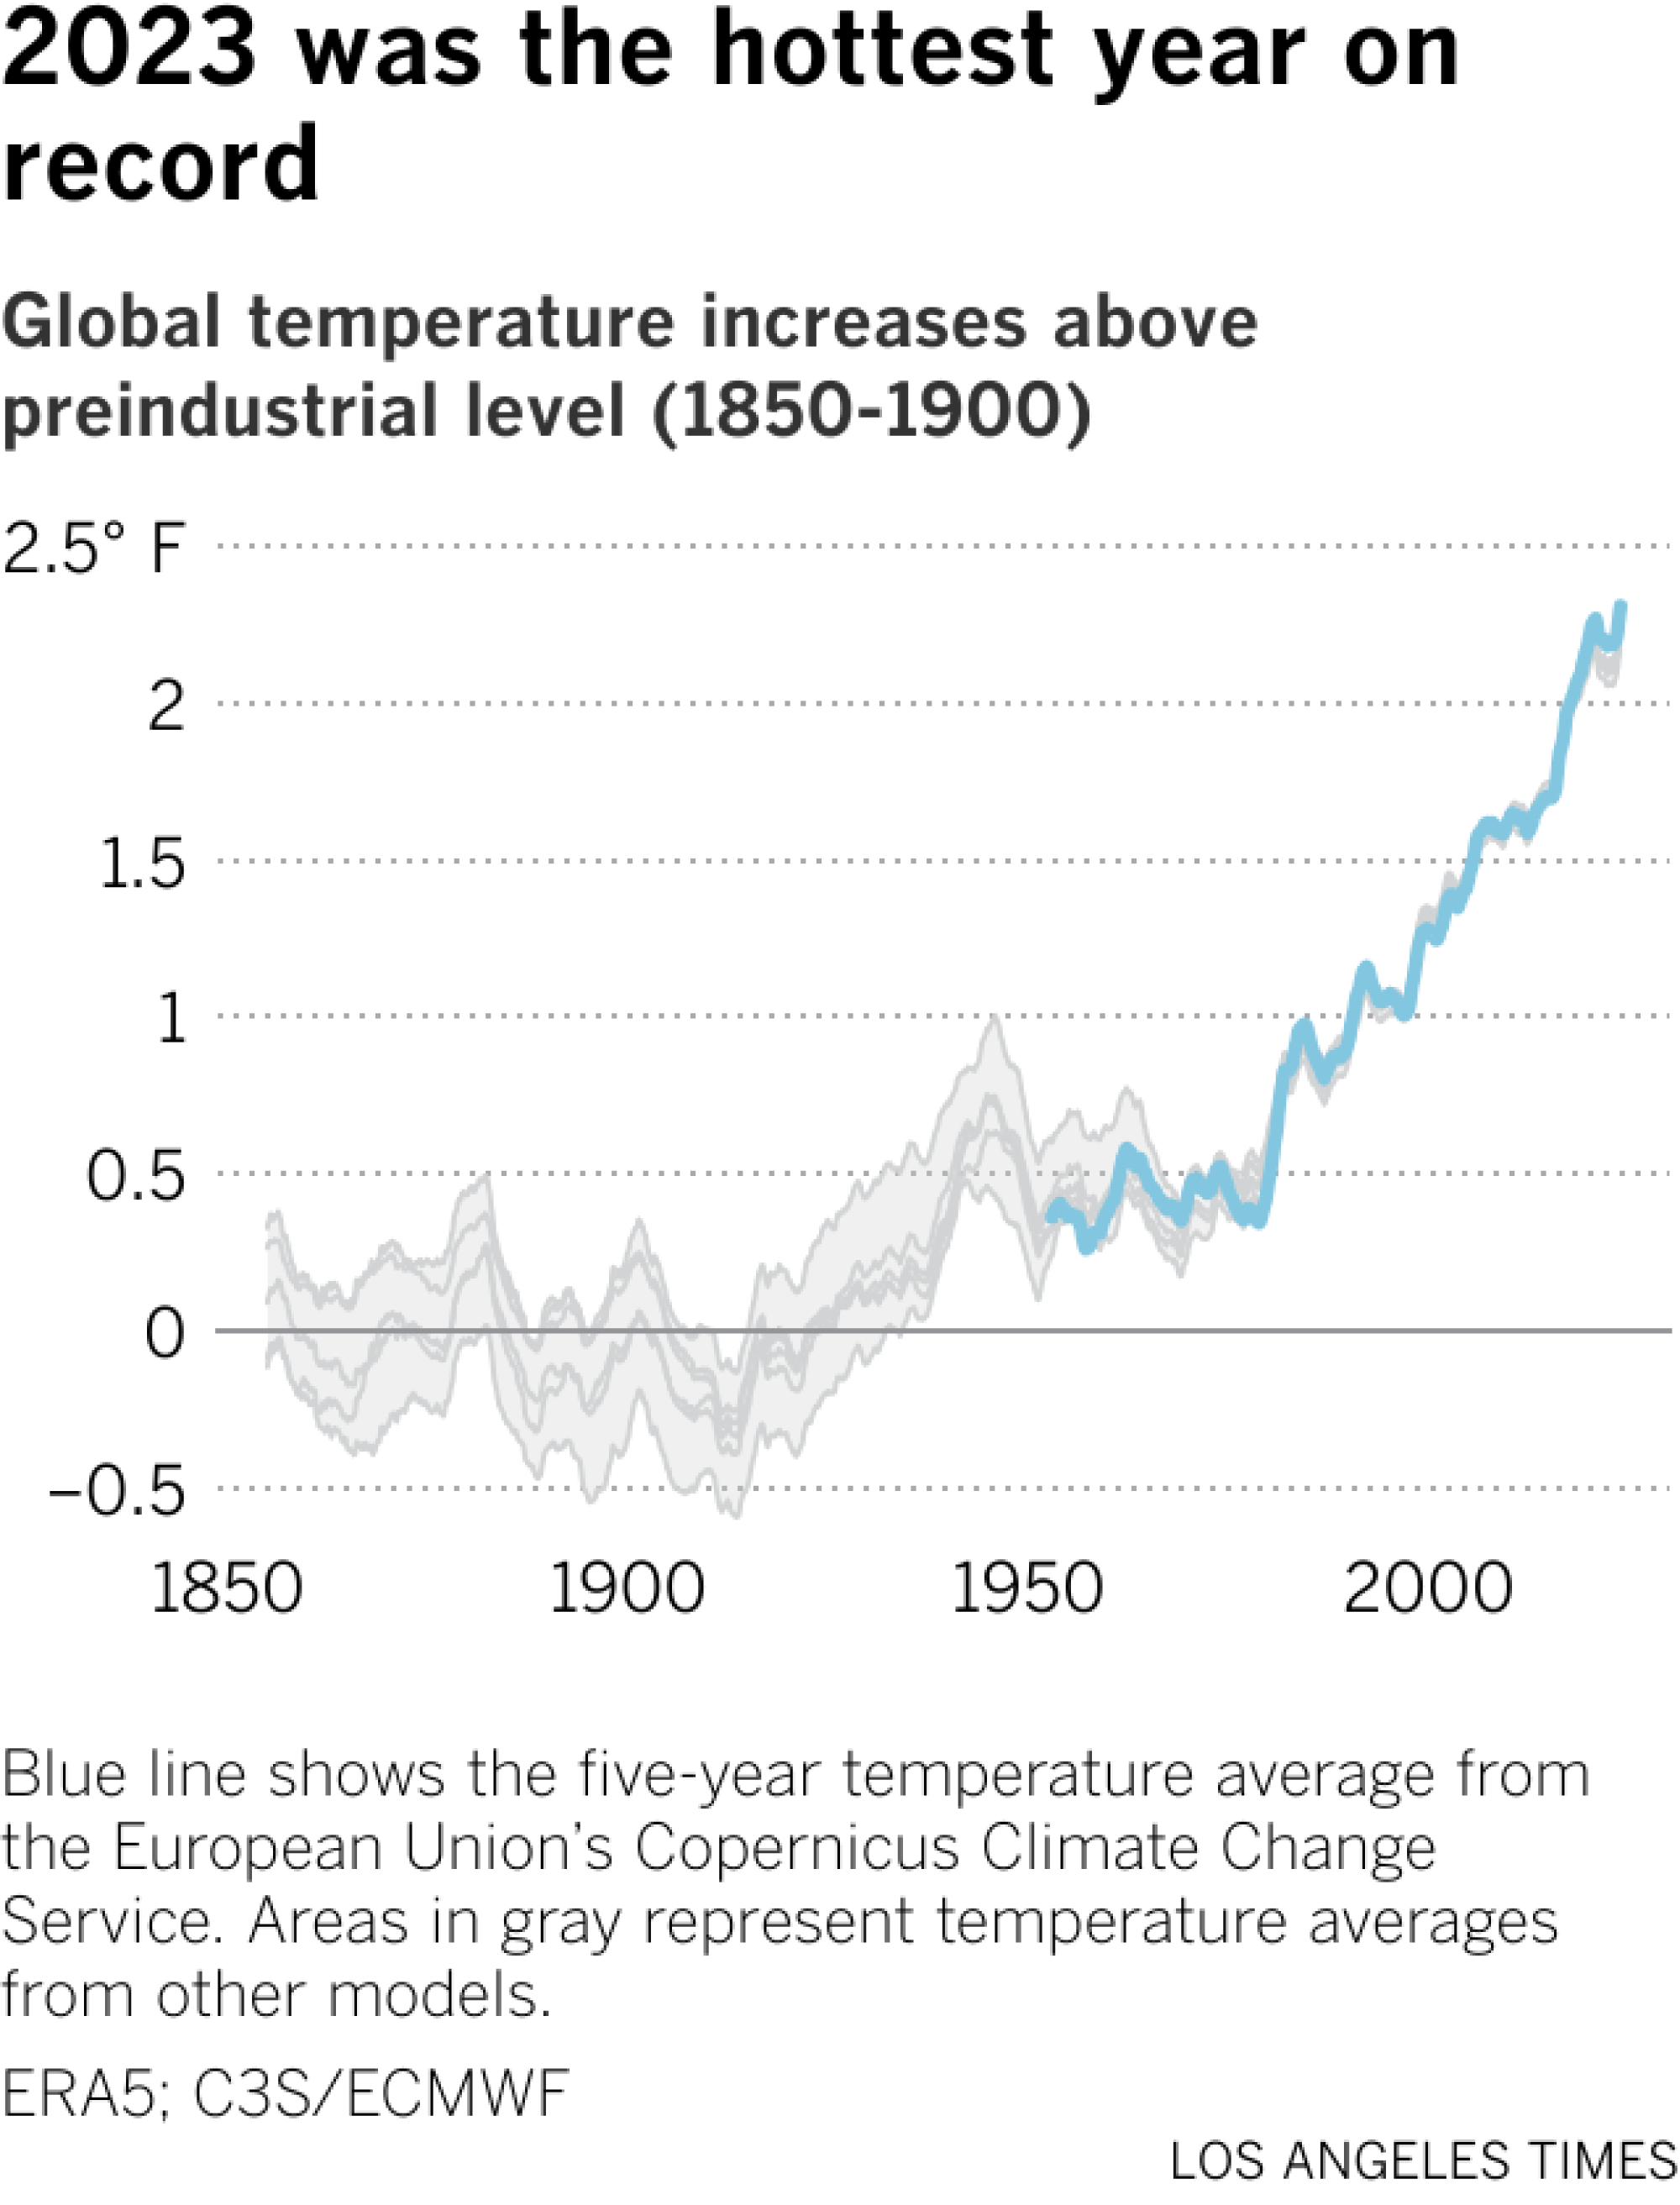 The line graph shows the average temperature changes estimated by Copernicus and other sources since 1850. Temperatures have increased steadily since about 1975.